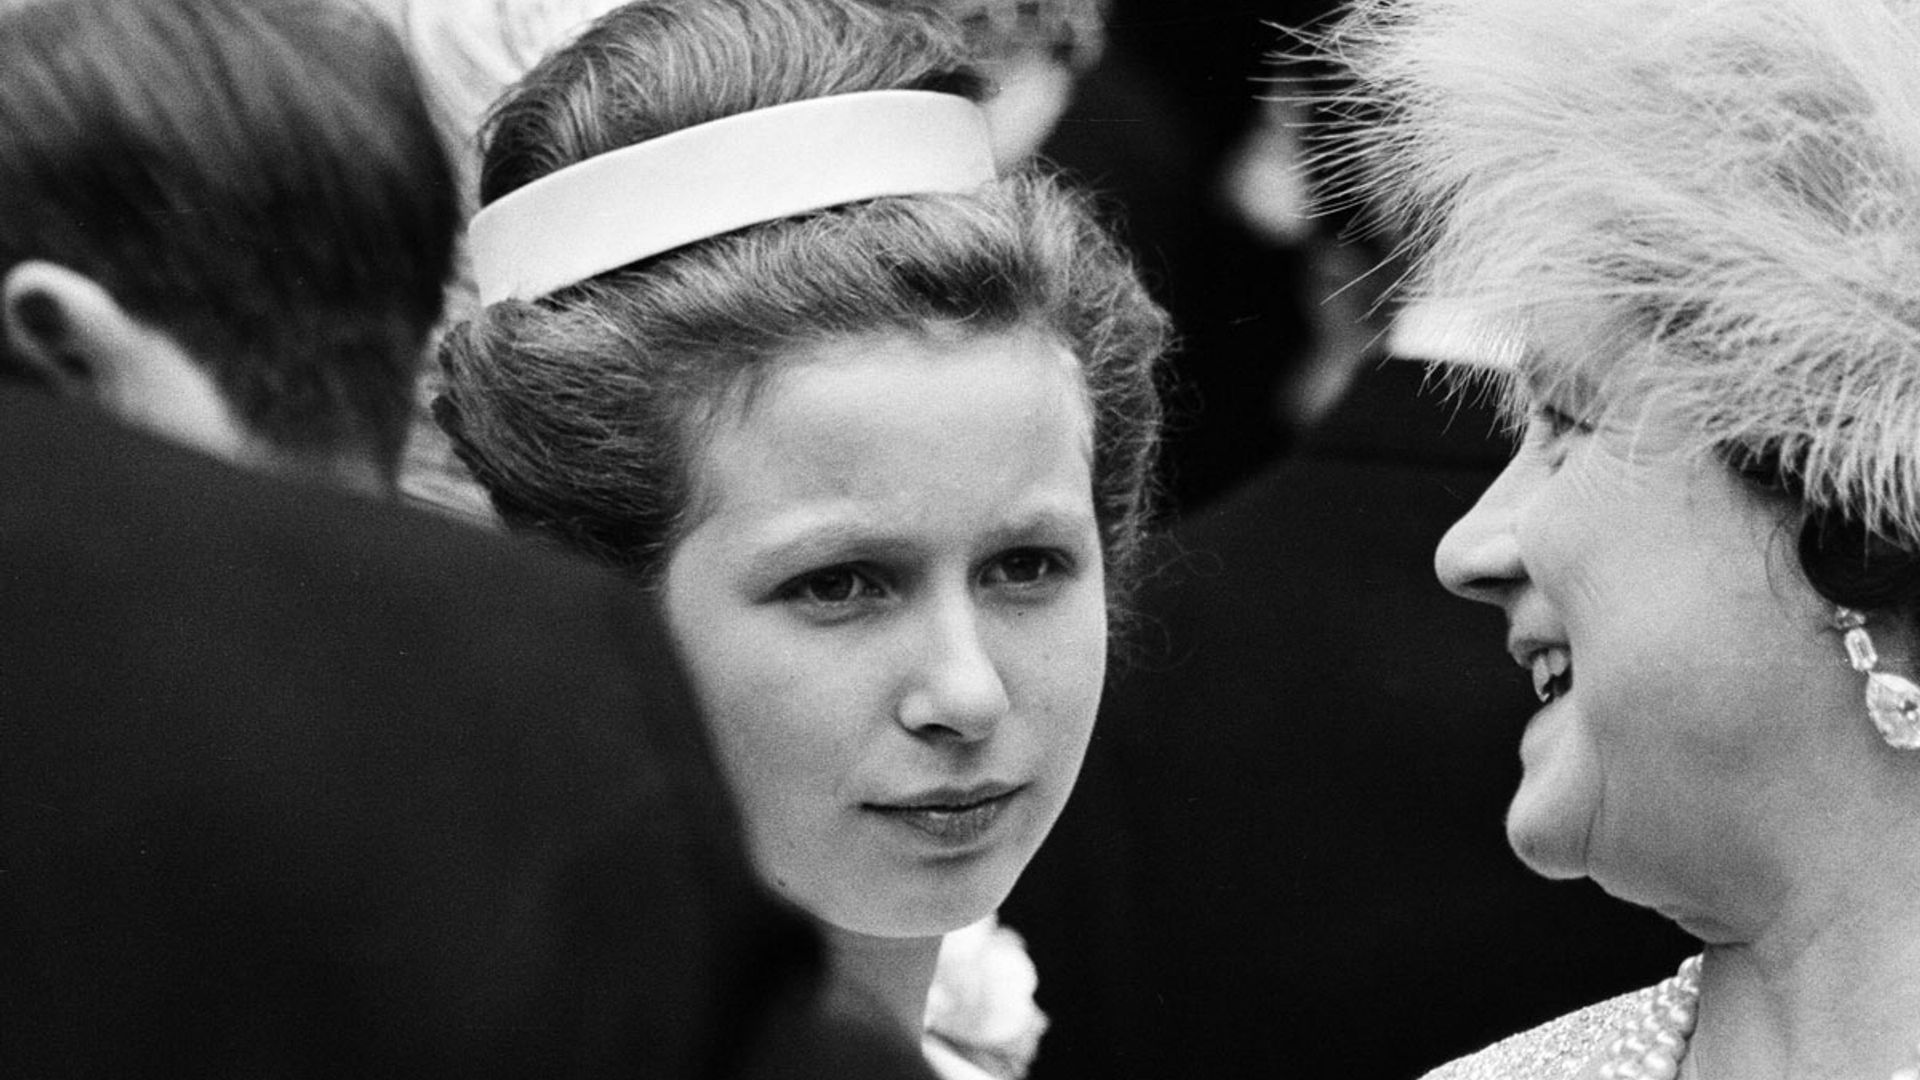 Princess Anne is a beautiful bridesmaid in unearthed royal wedding photos